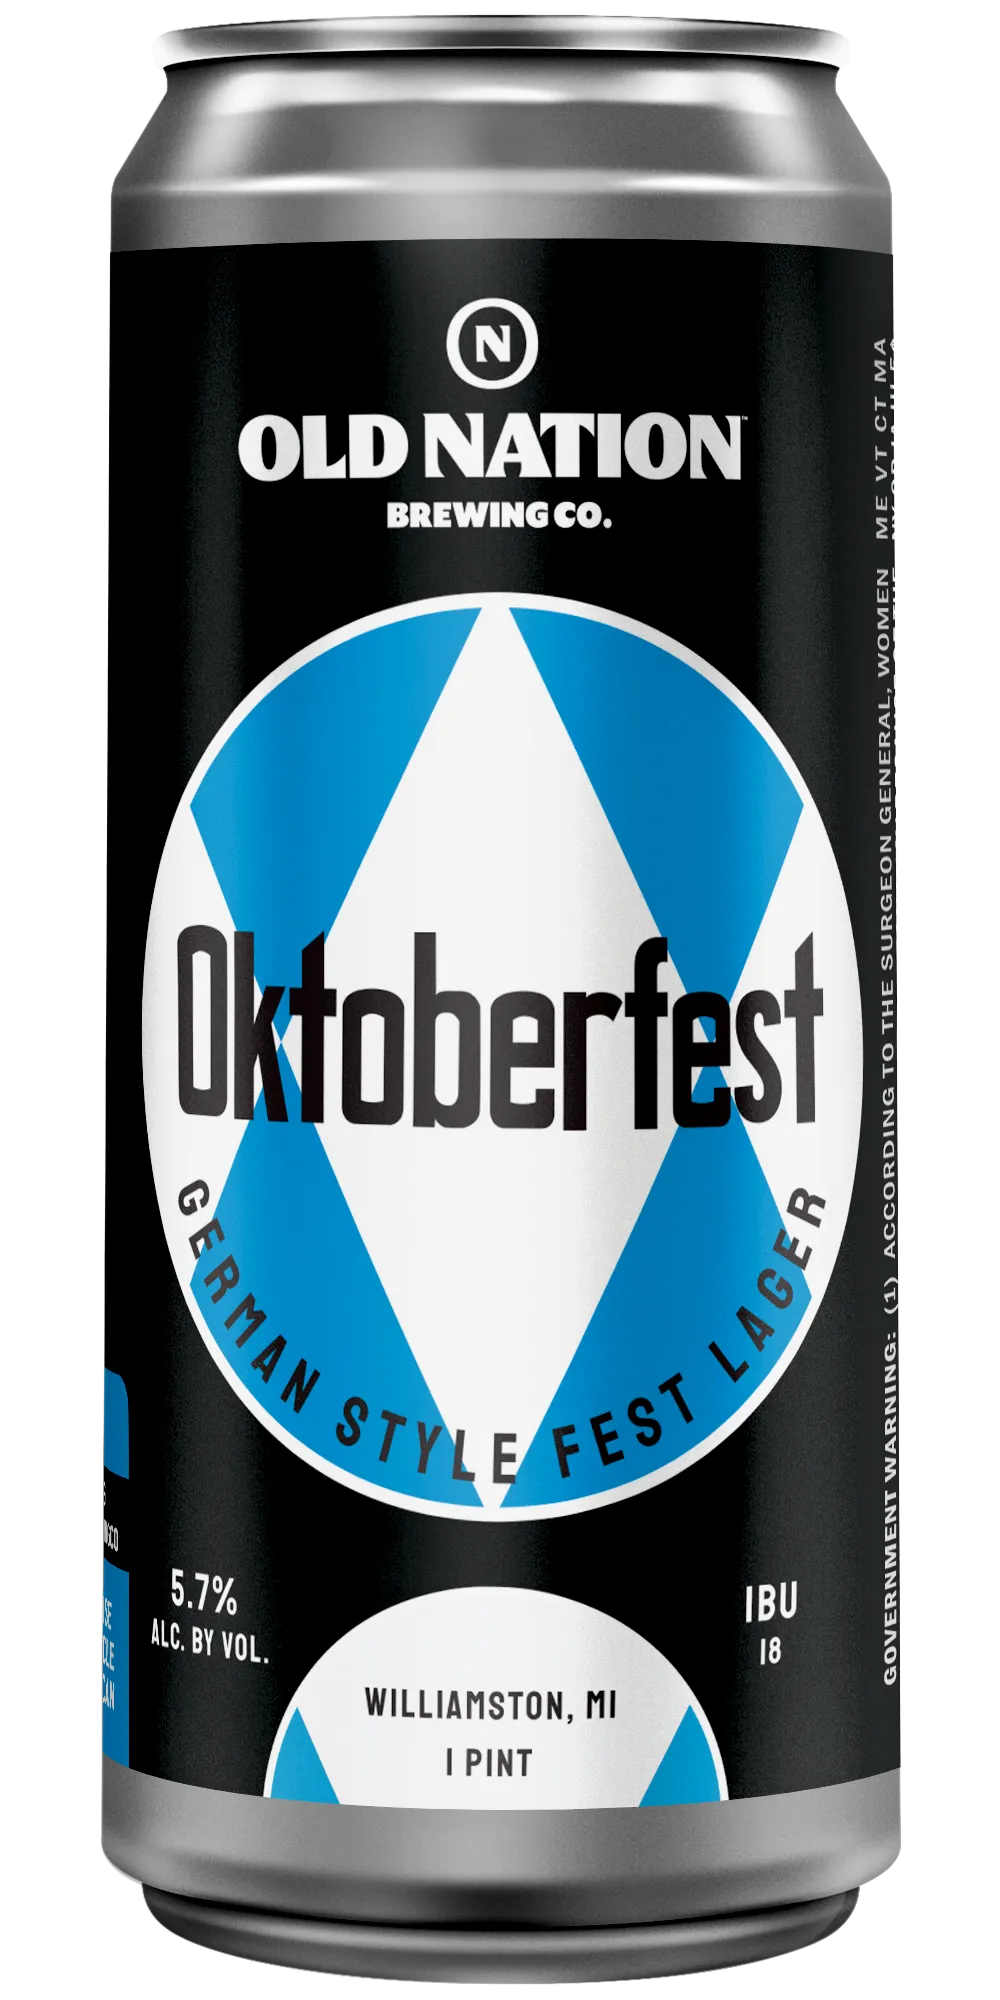 Old Nation Oktoberfest beer in an aluminum can